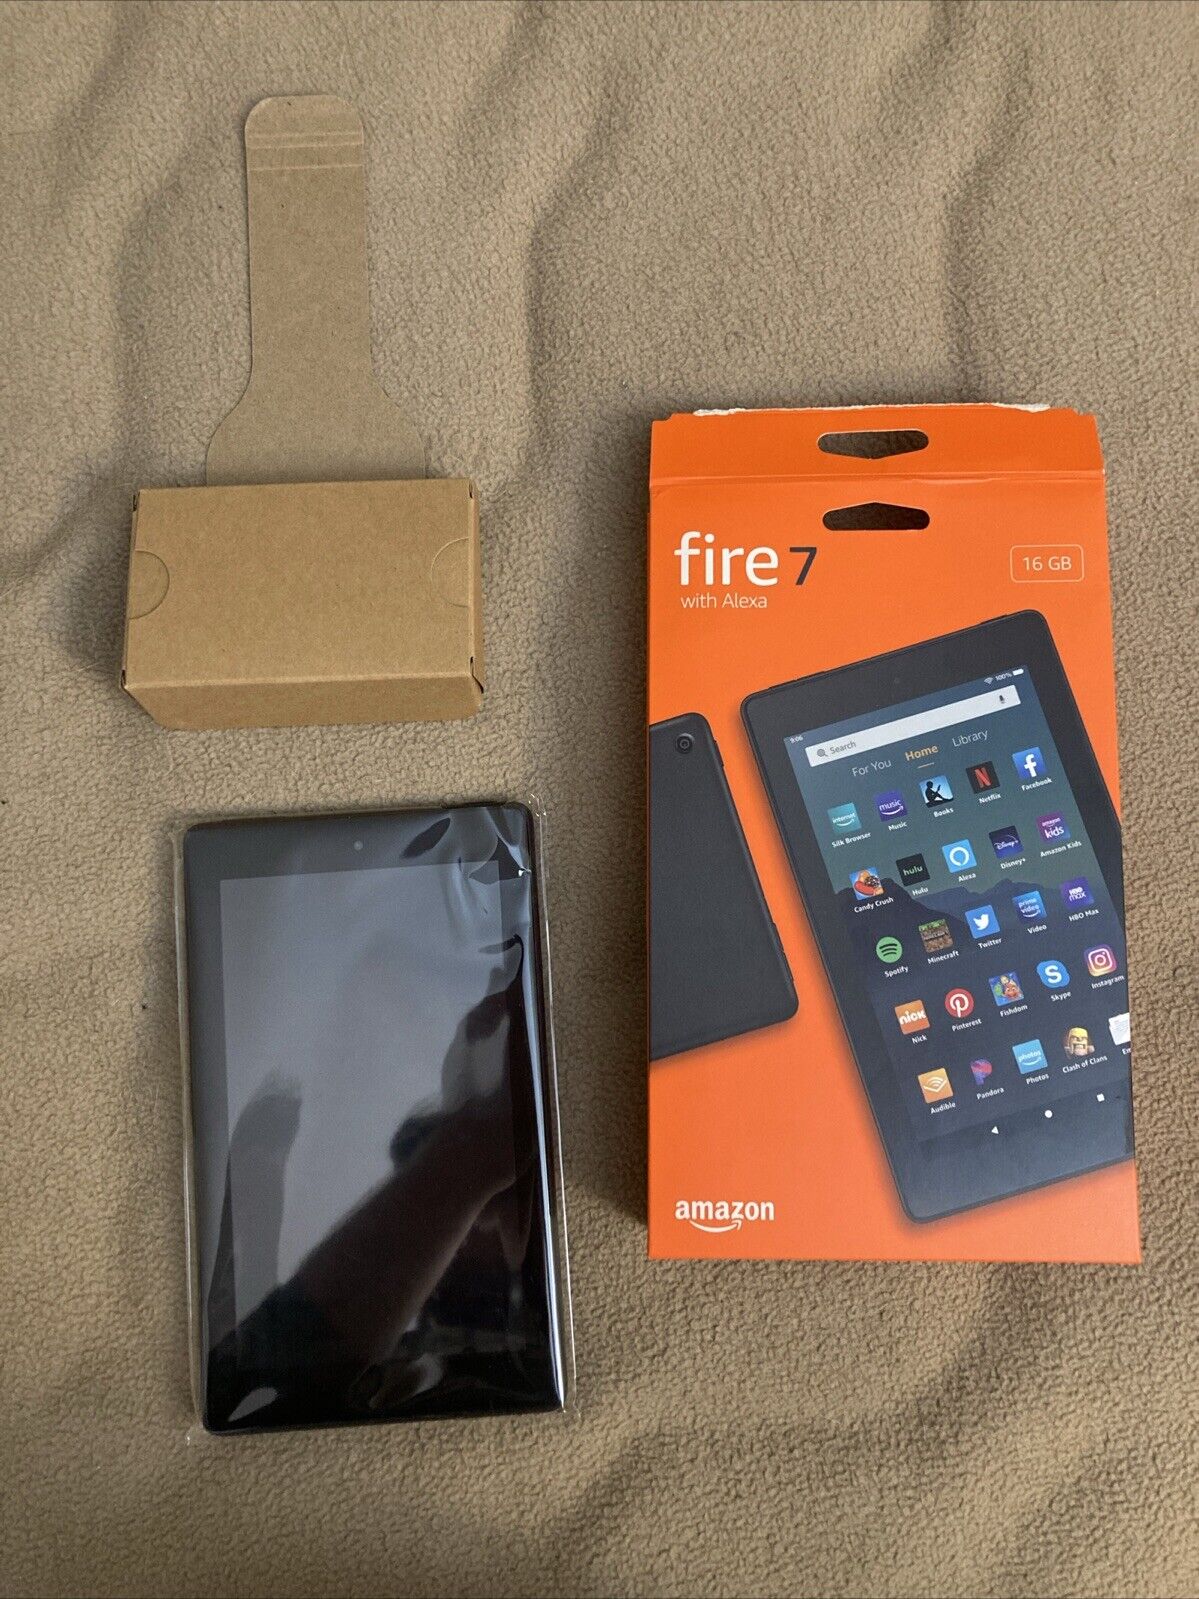 Amazon Fire 7 (9th Generation) 16GB, Wi-Fi, 7in - Black (Without Special Offers)